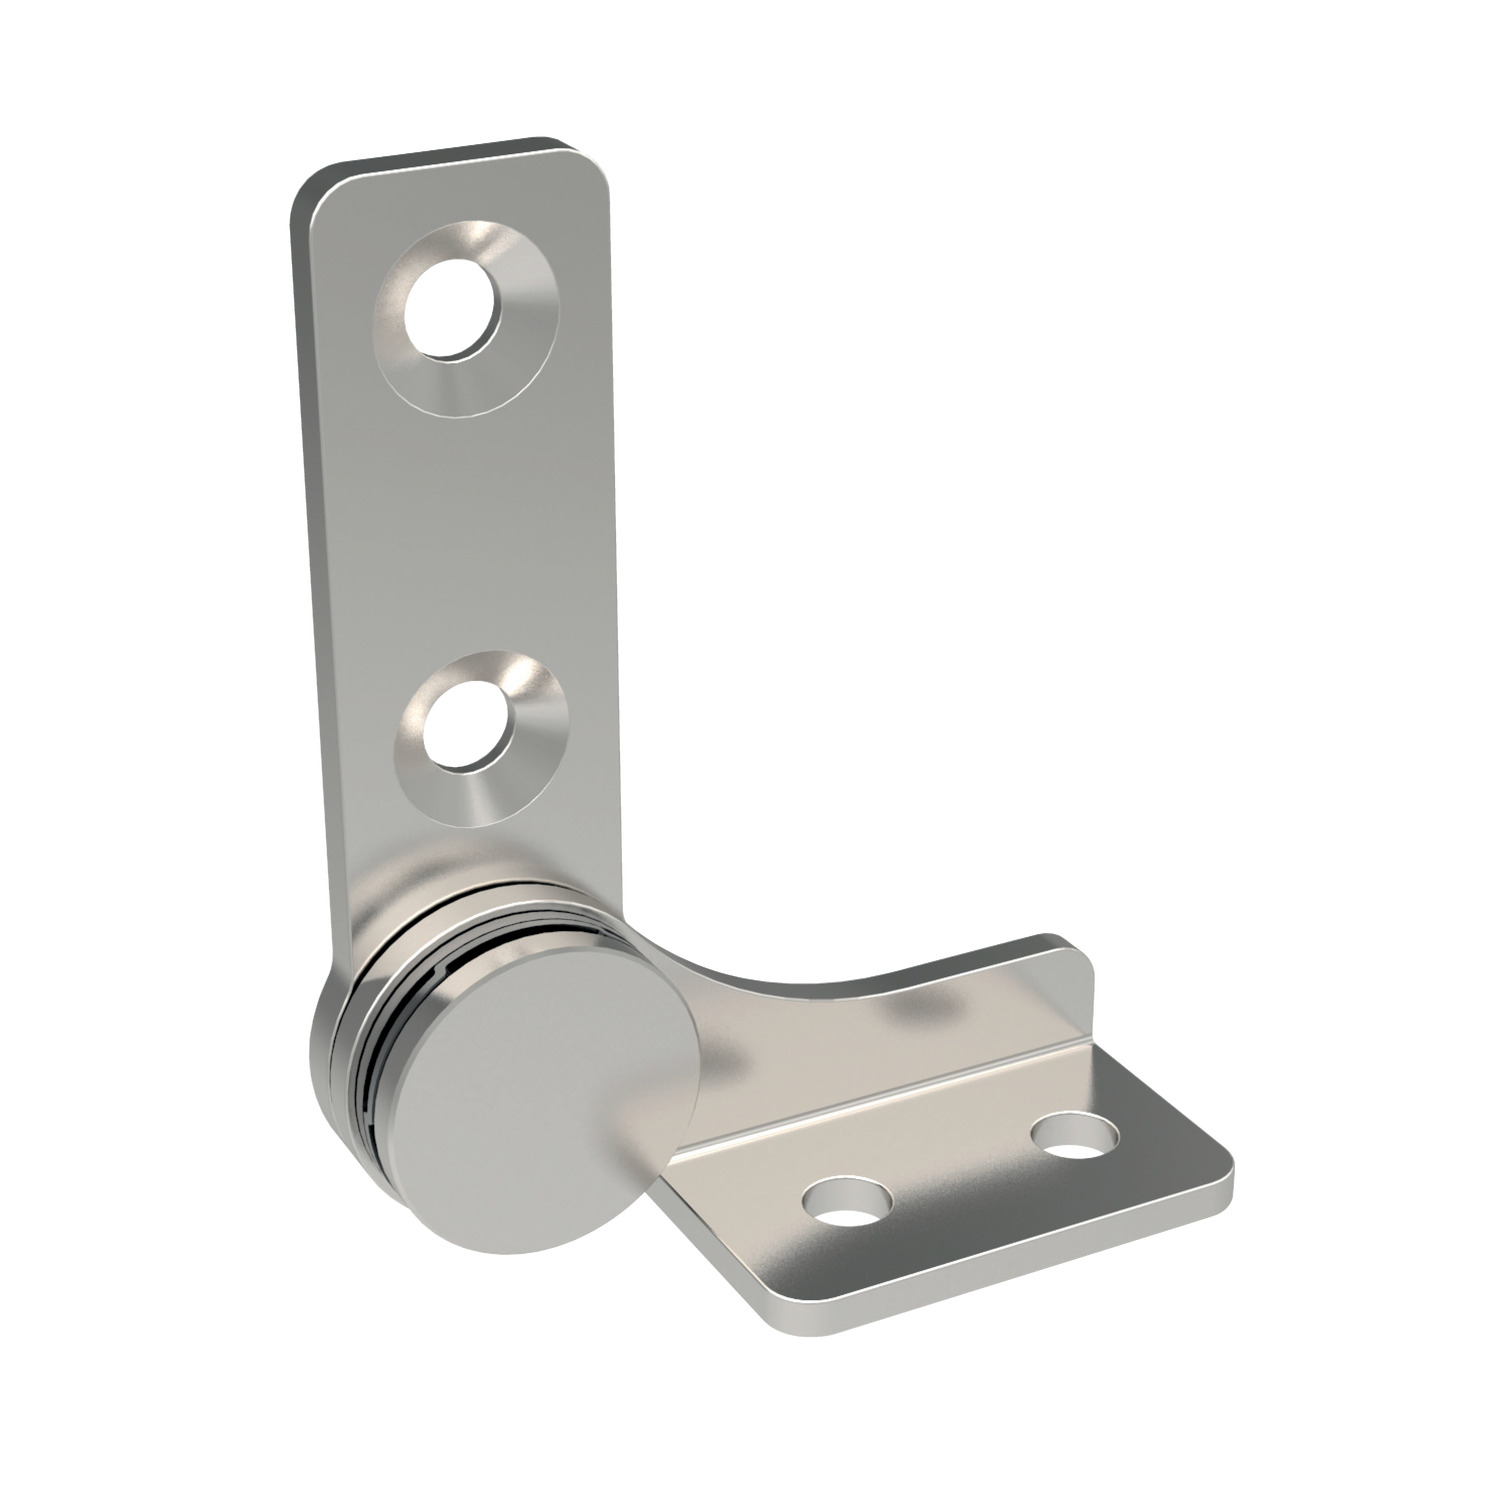 S4022.AC0110 Constant Torque Friction Hinges - SS Screw mount - Stainless steel - Left - 7.1 Torque kgf/cm +/-20%